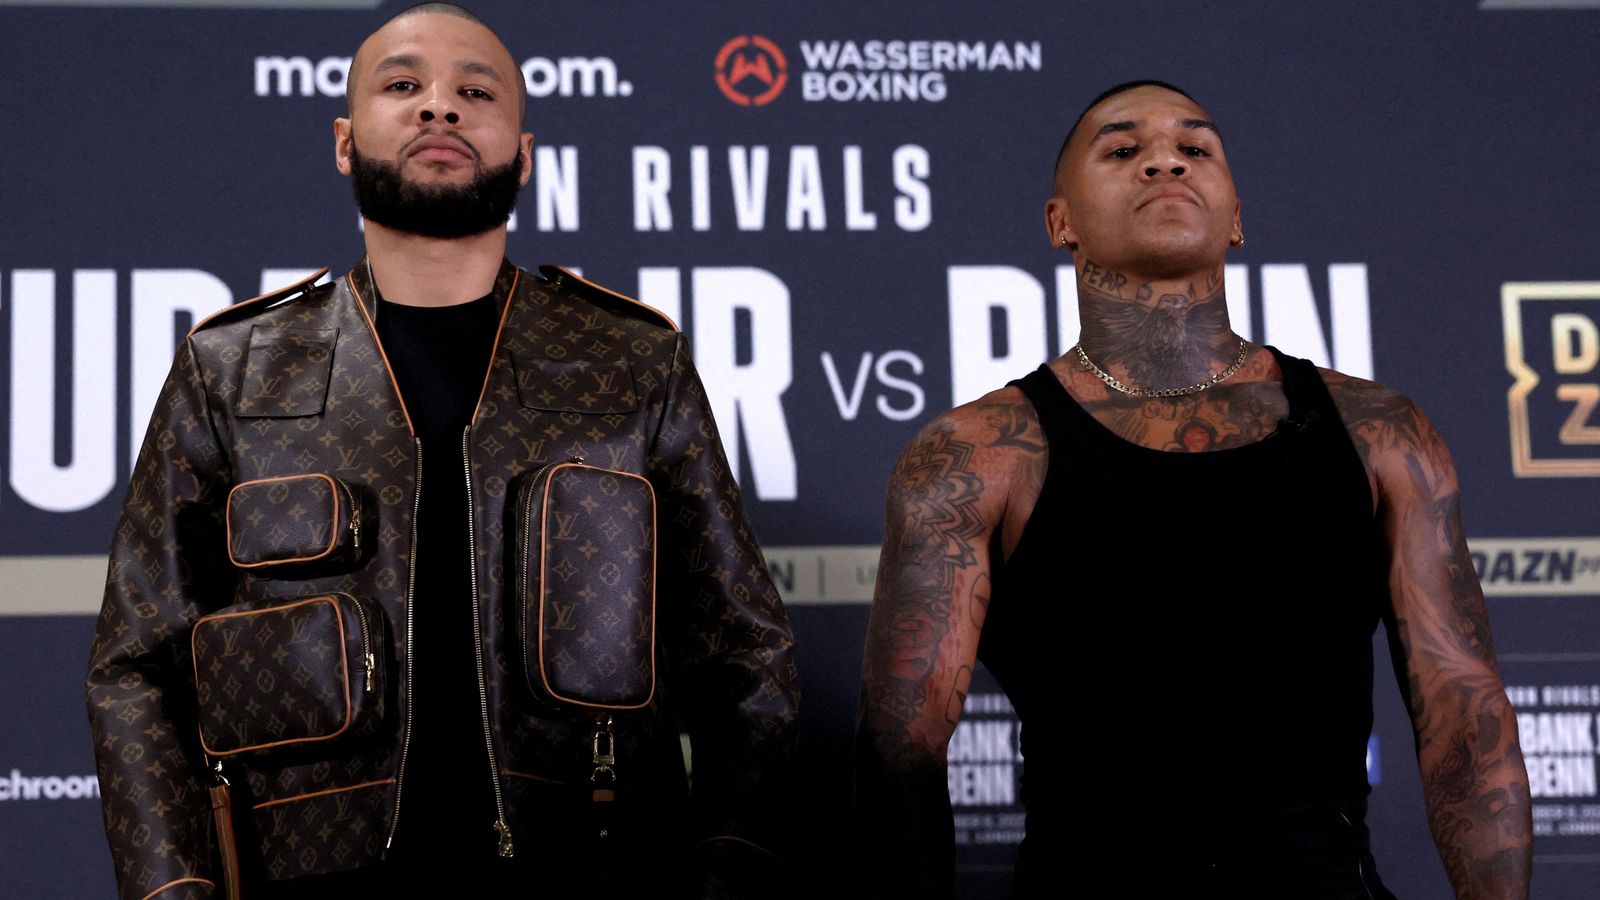 Boxing board says Conor Benn and Chris Eubank Jr's fight 'prohibited' after failed drug test